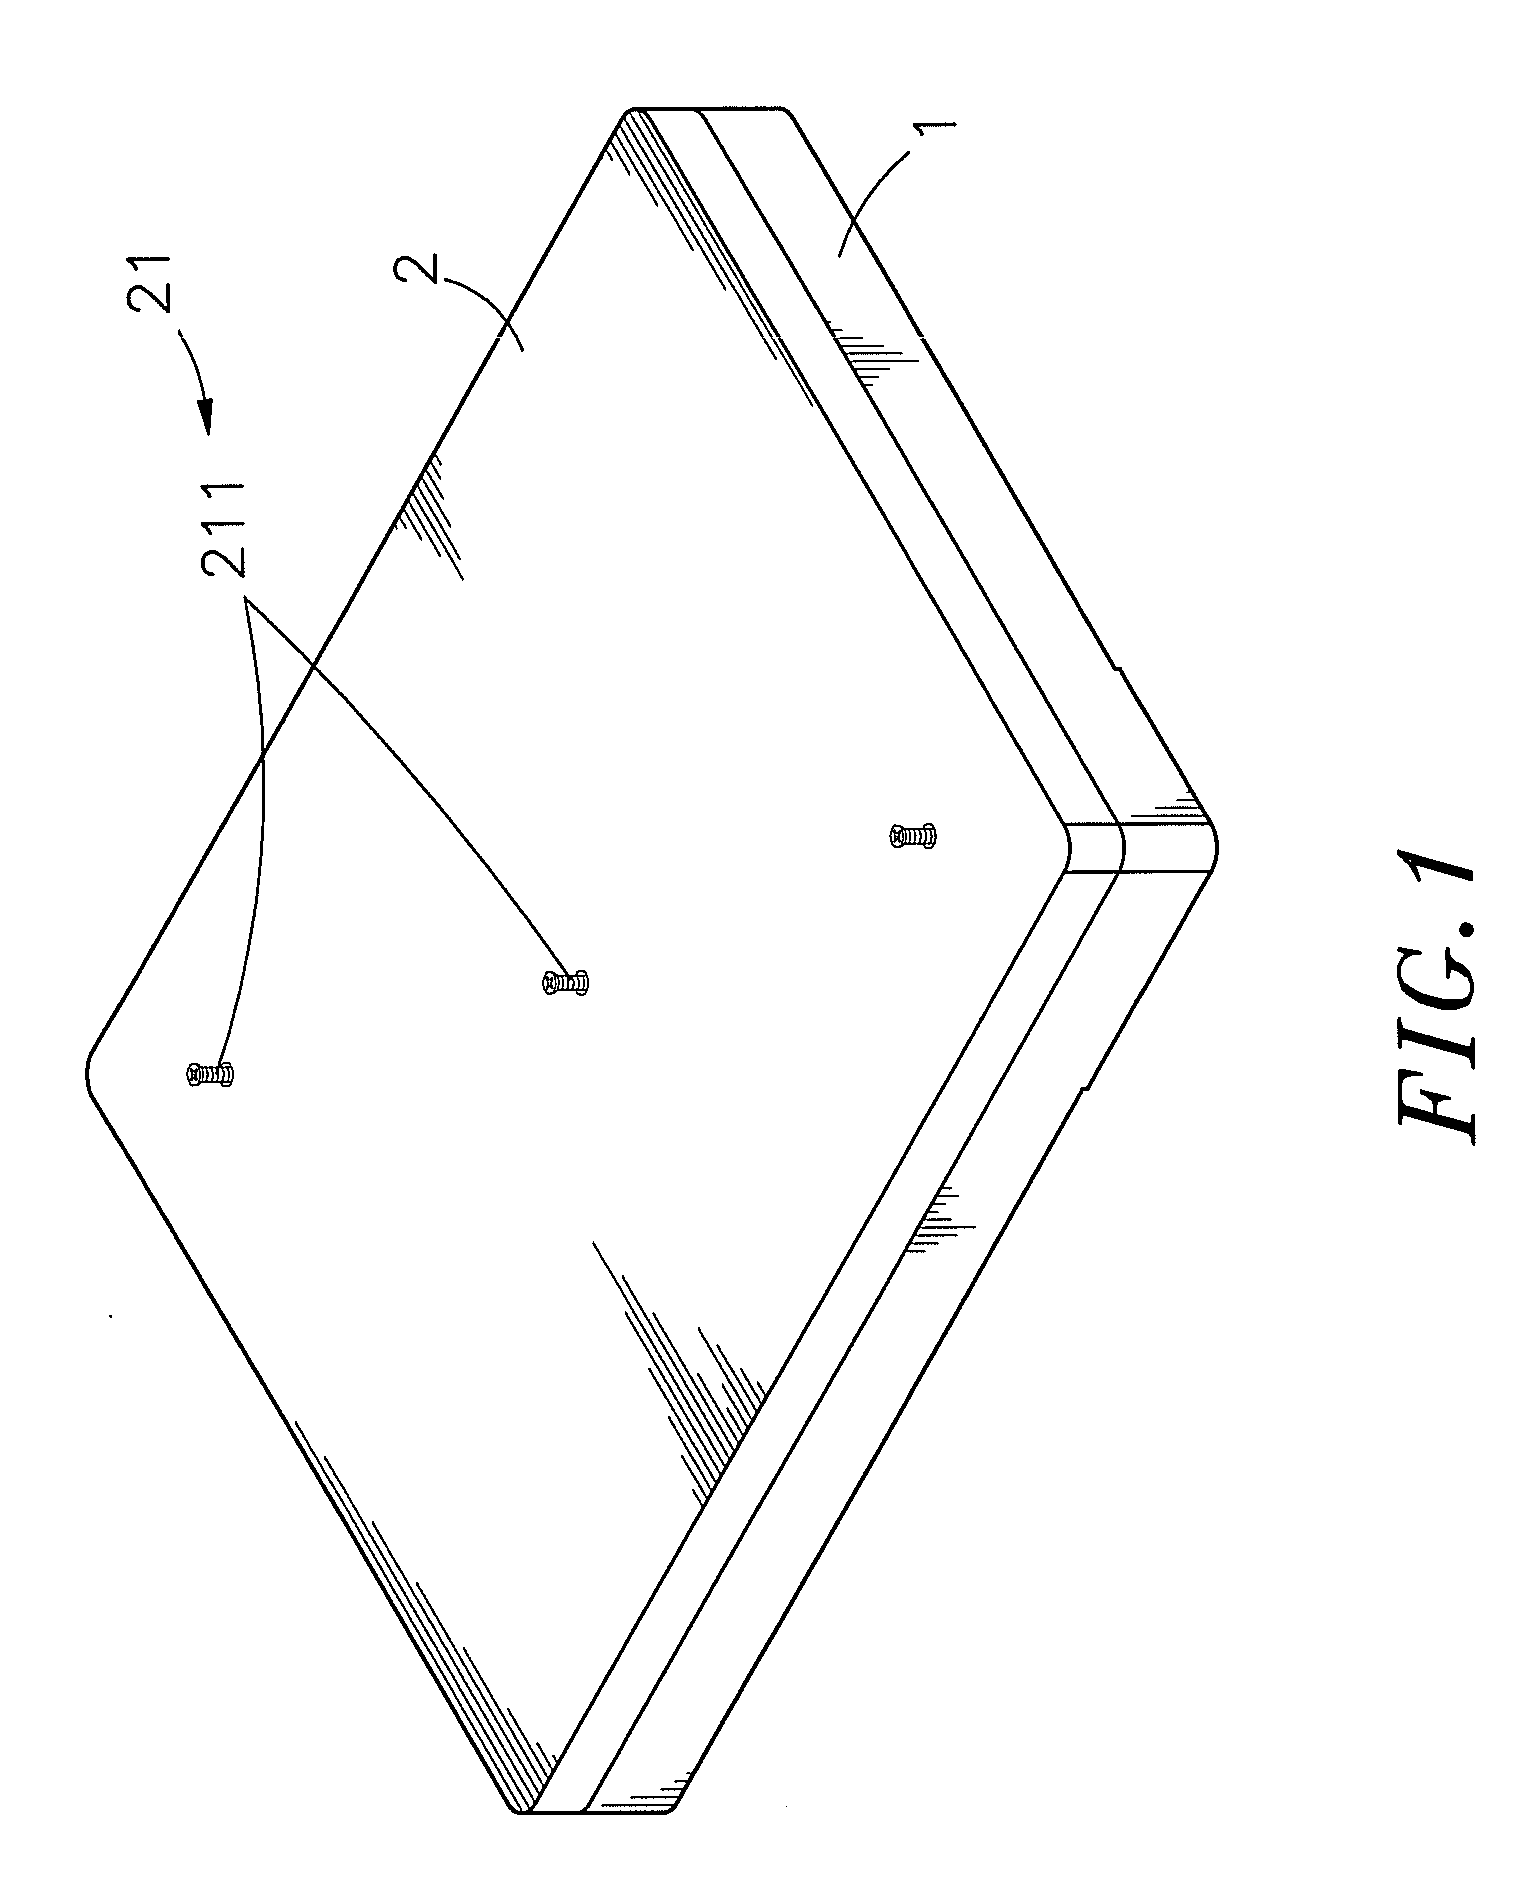 Cavity filter with high flatness feedback